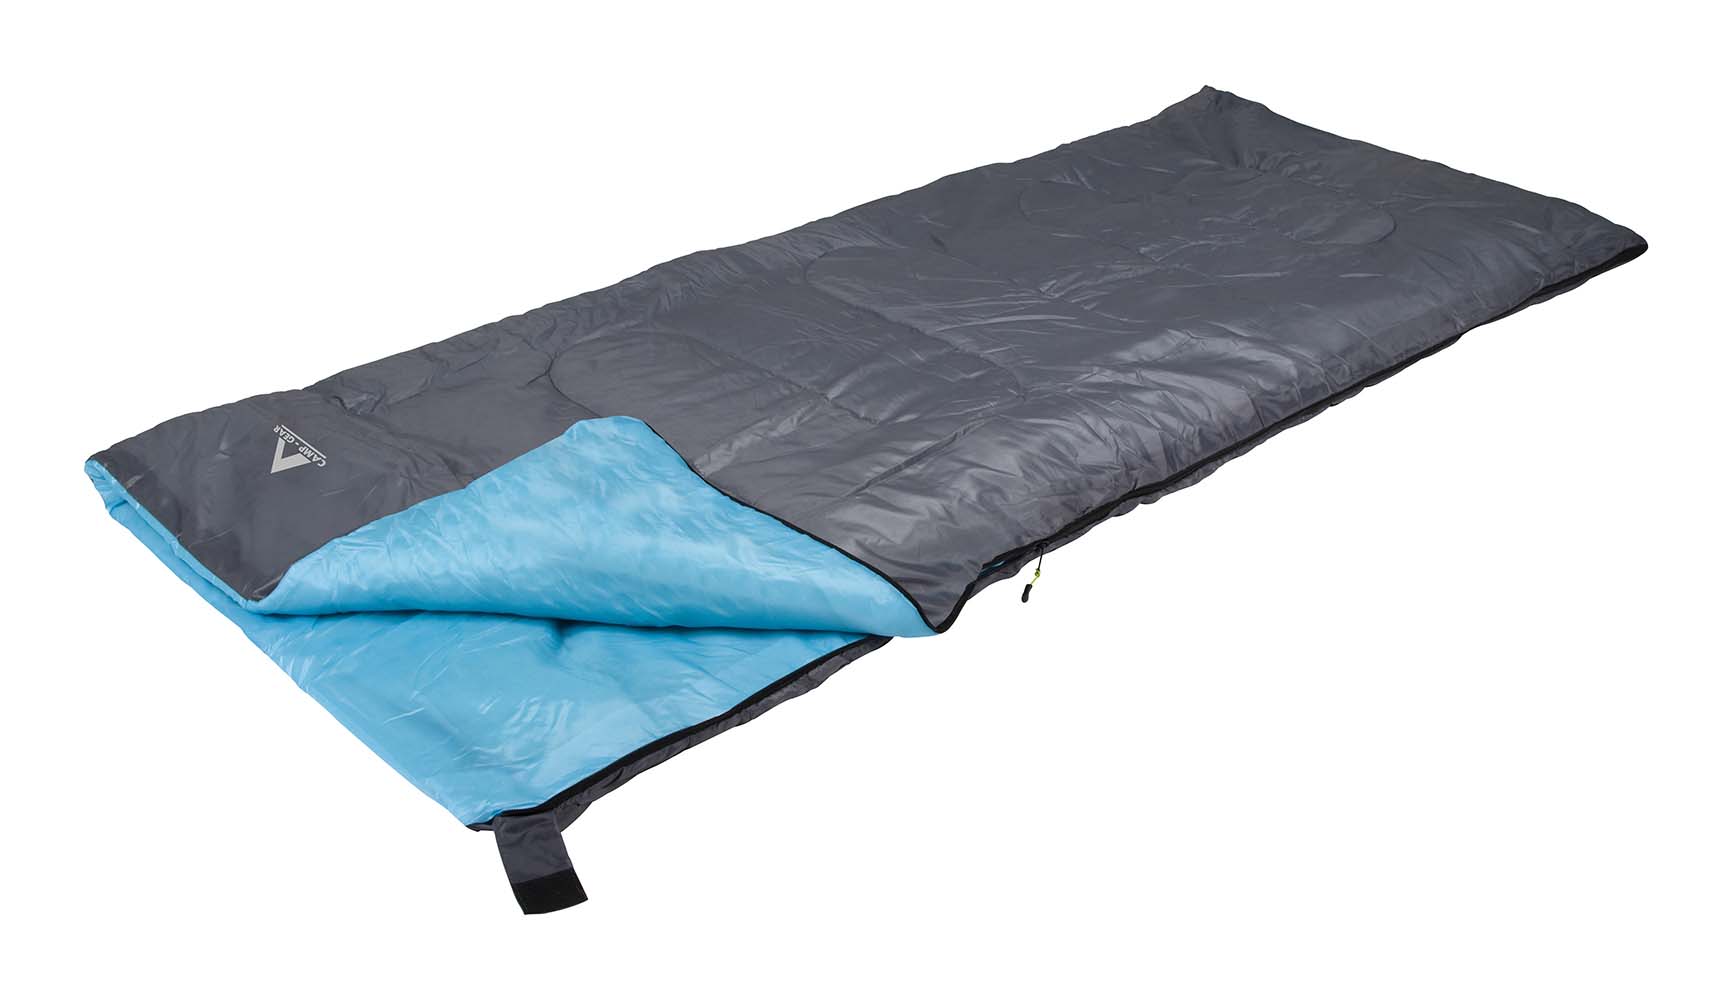 3605747 A very compact sleeping bag. Suitable for use from 10 degrees and very comfortable at 17 degrees. This sleeping bag features a drawstring and comfort top edge. Unzipped, this sleeping bag can be used as a blanket or zipped on to another Camp-Gear sleeping bag. Filled with 100 gr/m² Hollow Fiber and both the inside and outside is made of 170T polyester. This sleeping bag is extra compact to store in the supplied case. This makes it ideal for traveling.